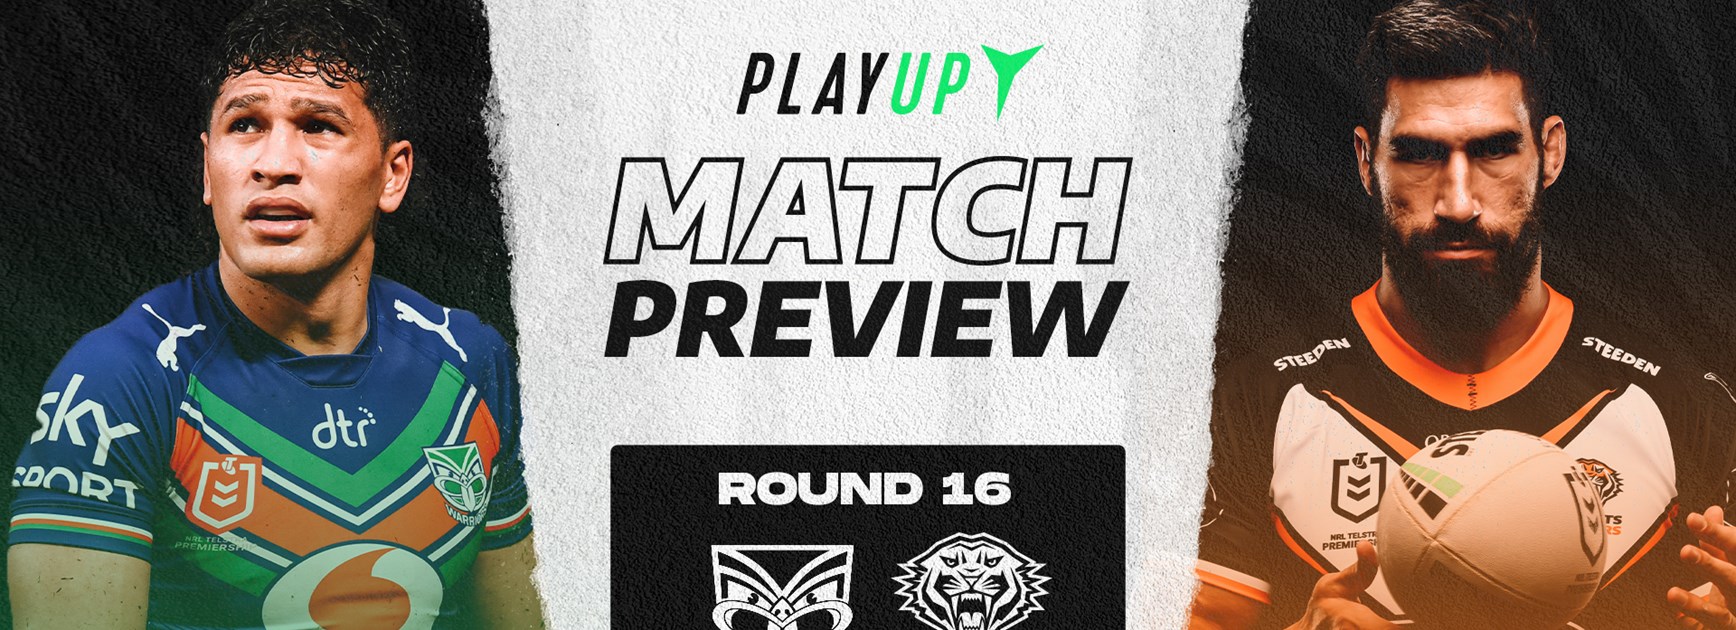 Match Preview: Round 16 vs Warriors